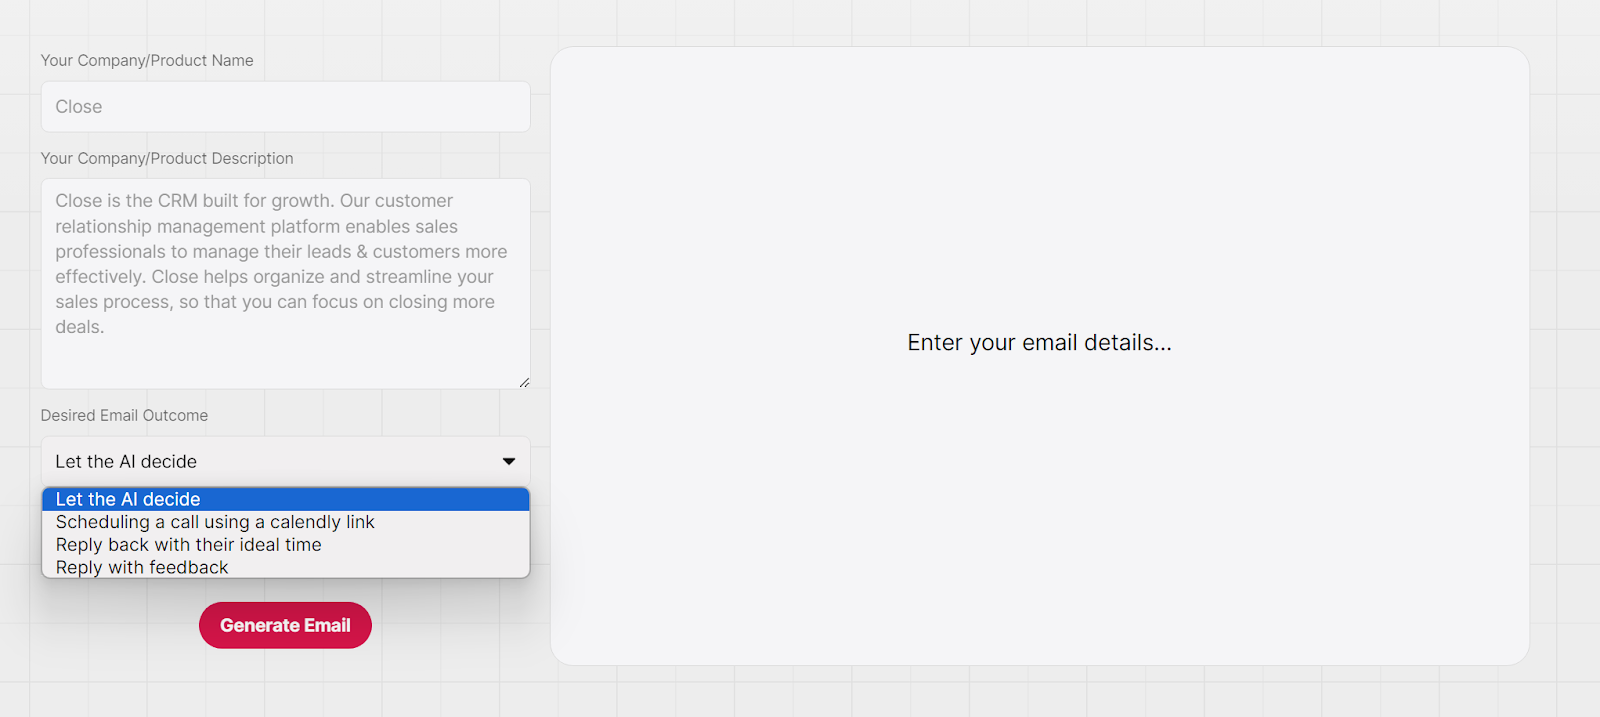 Close CRM has an AI email generator that lets users enter company and product descriptions to create emails for free.